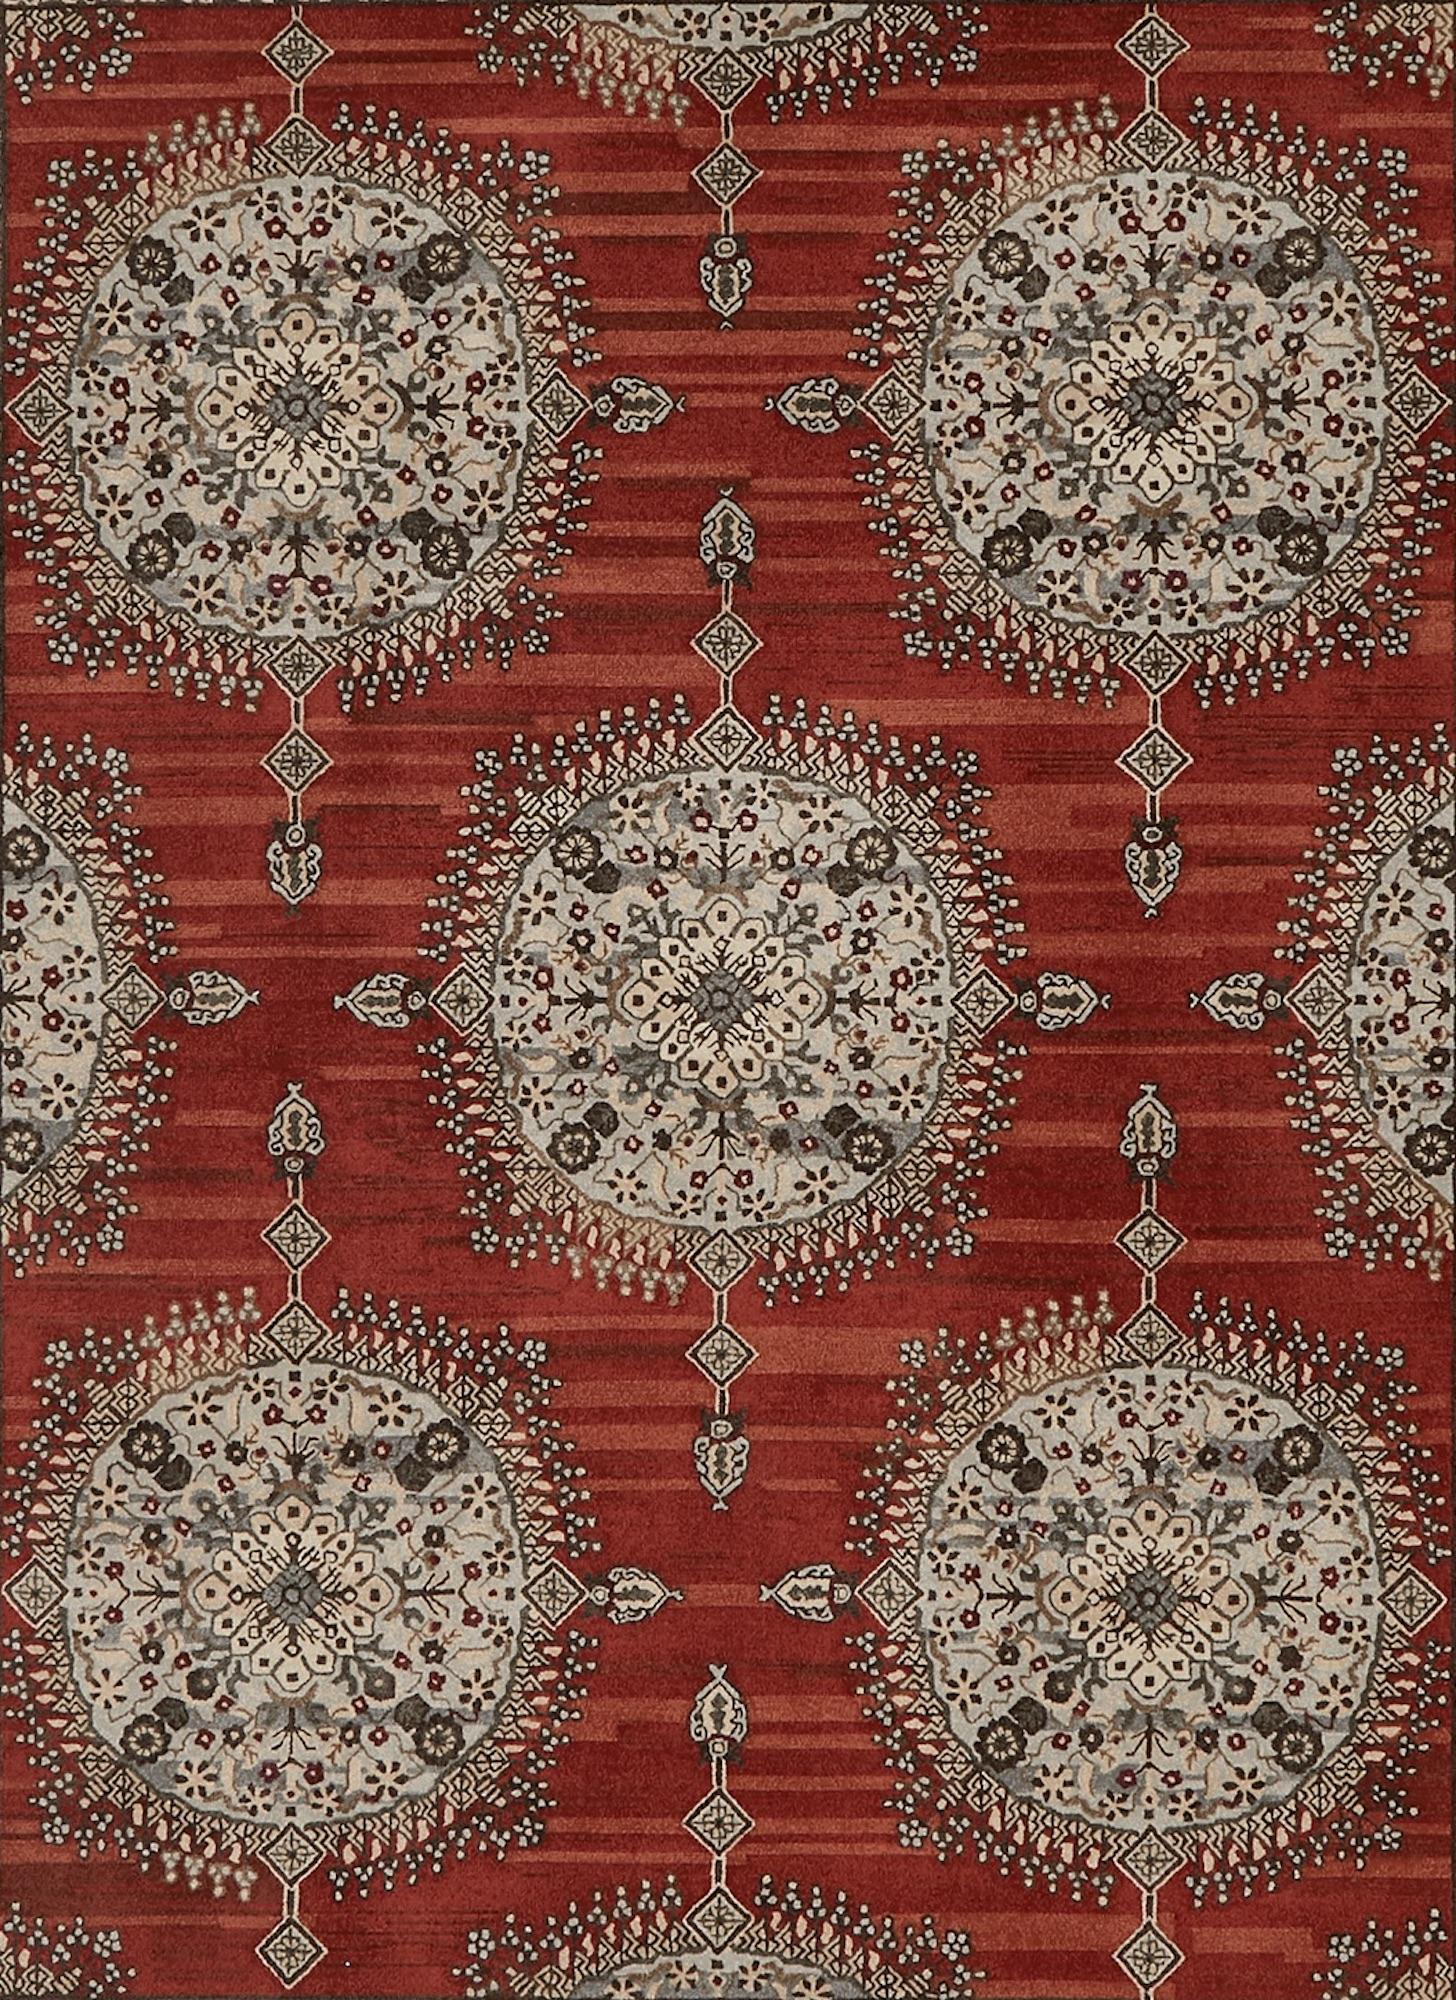 Traditional forms are reinterpreted with a modern spirit in this dressy, pattern-driven collection. Familiar geometric, floral and border motifs, delicately rendered in wool, give this collection an aura of sophistication and formality.

Rugs and